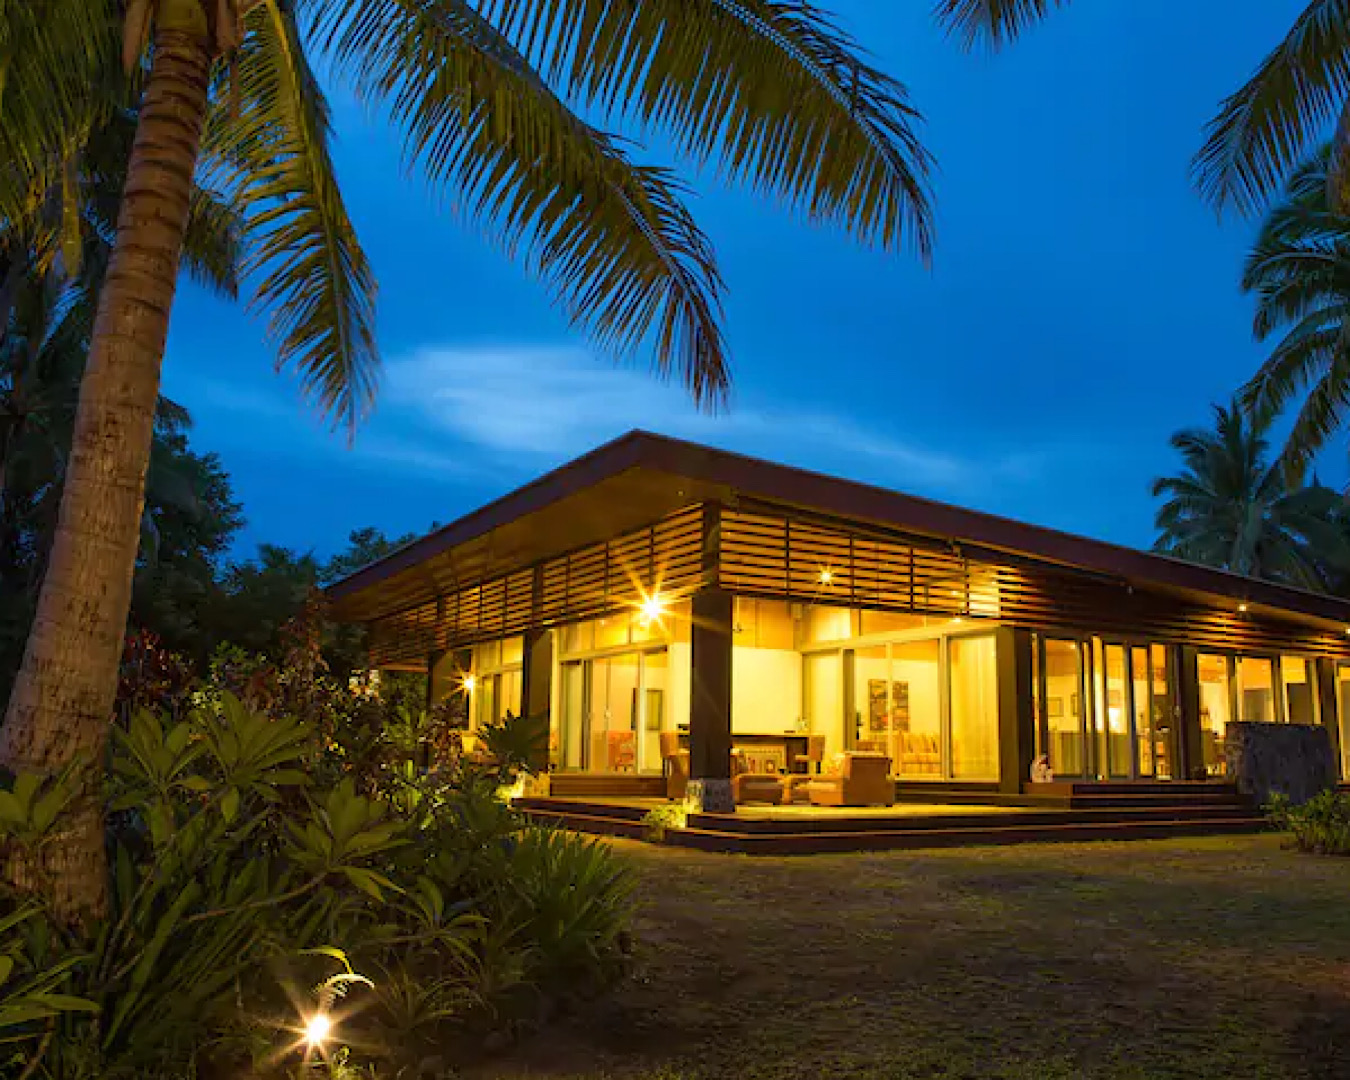 Natabe Retreat, one of the best Airbnbs in Fiji stands gloriously lit in the early evening. 